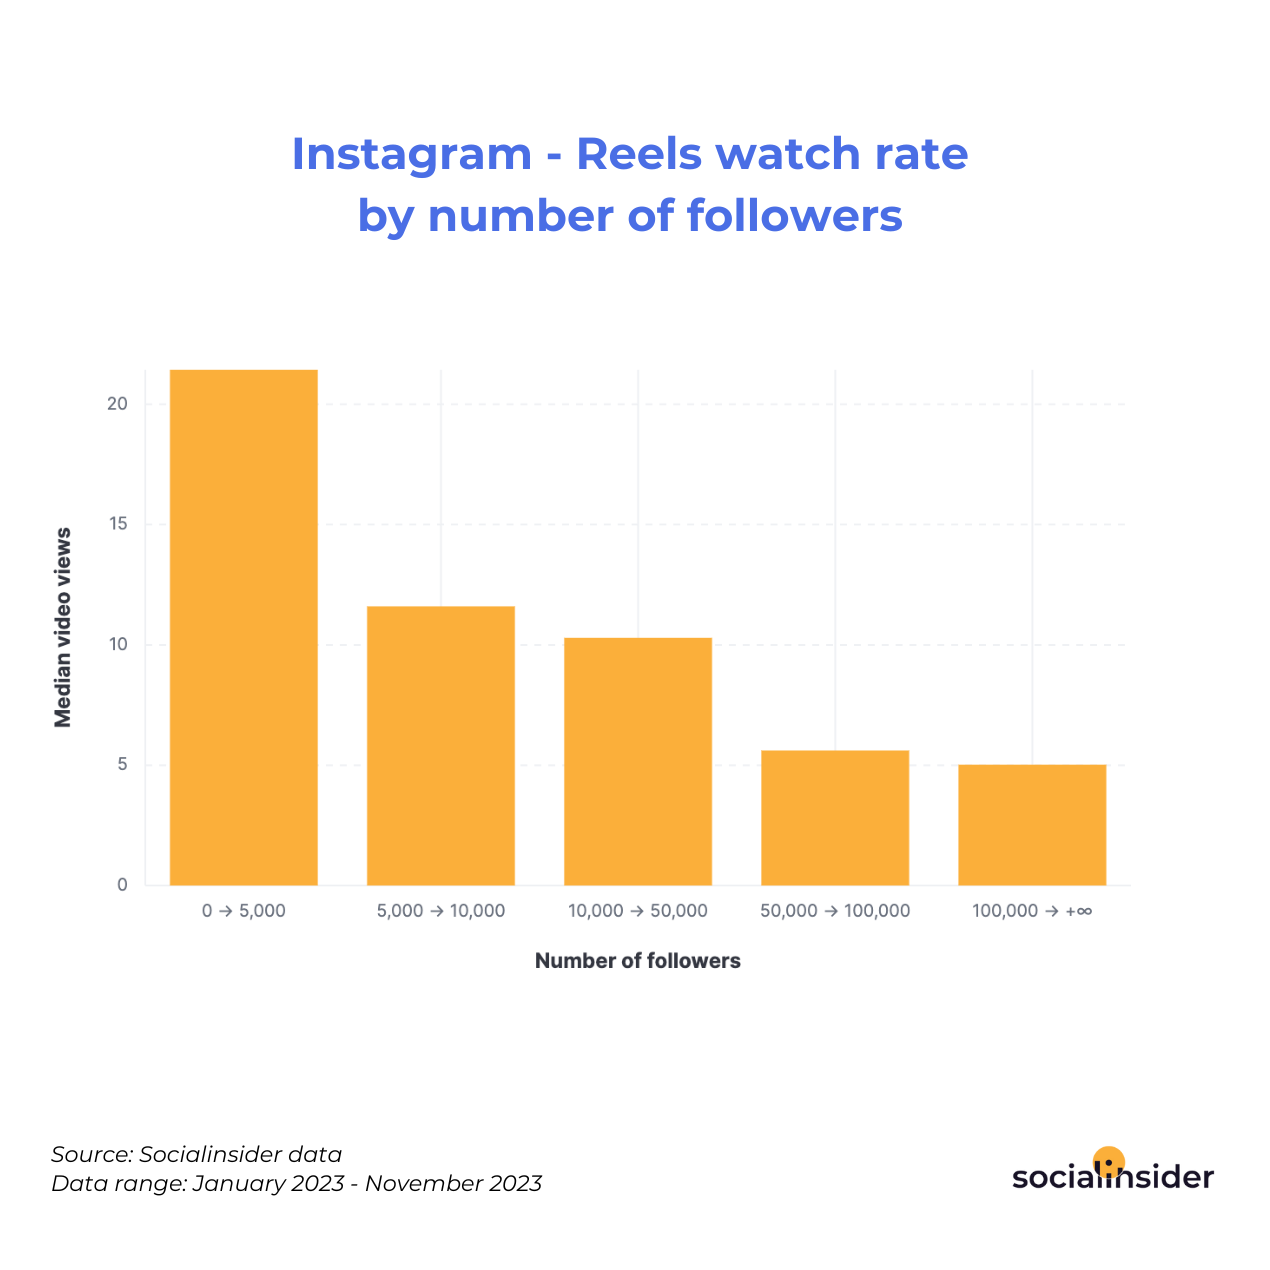 Instagram - Reels watch rate by number of followers